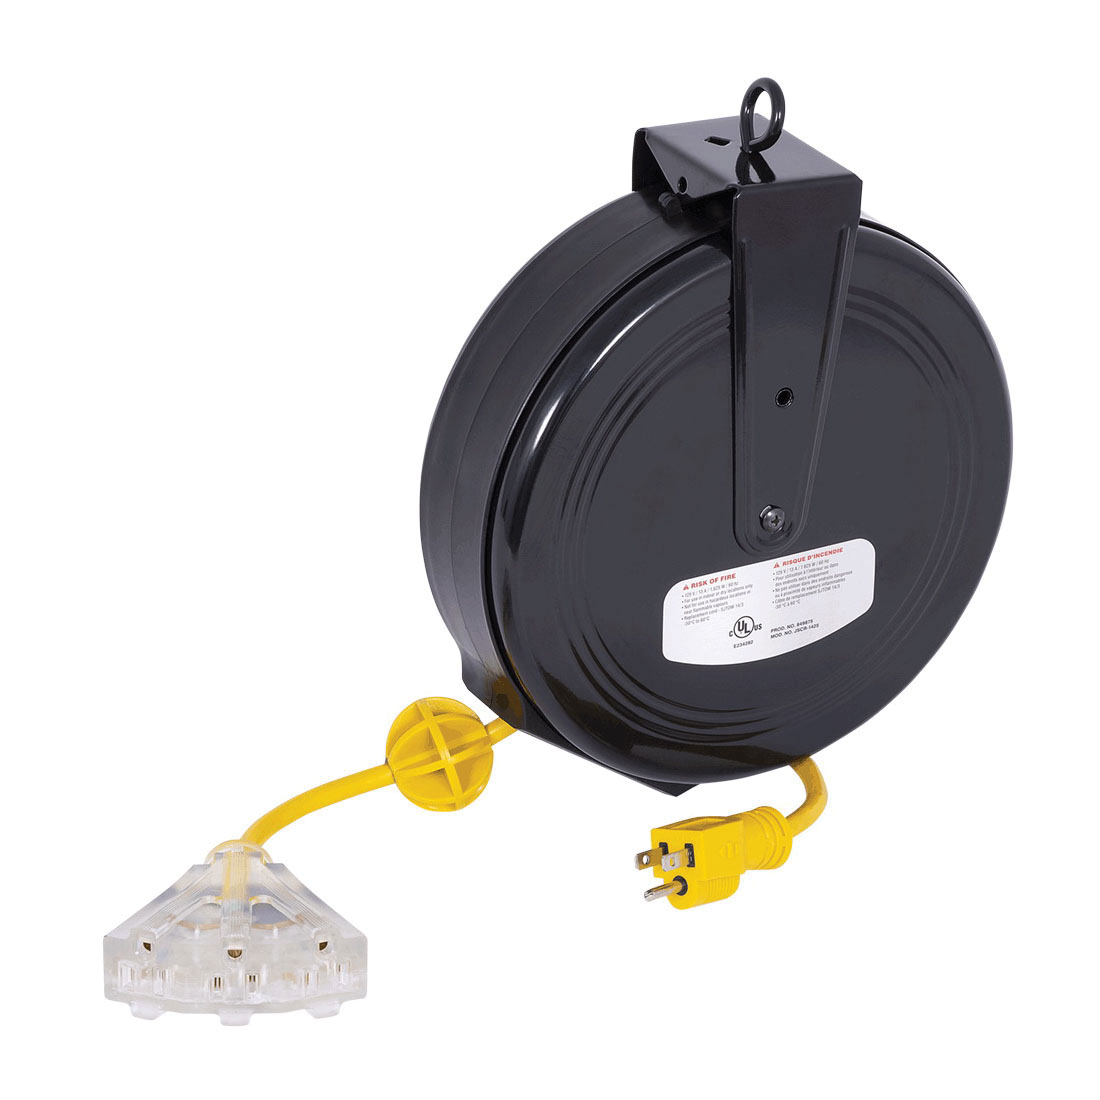 STARTECH® 849875 Retractable Extension Cord Reel, 125 VAC, 13 A, 30 ft L  Cord, 14/3 ga SJTOW Conductor, 3 Outlets